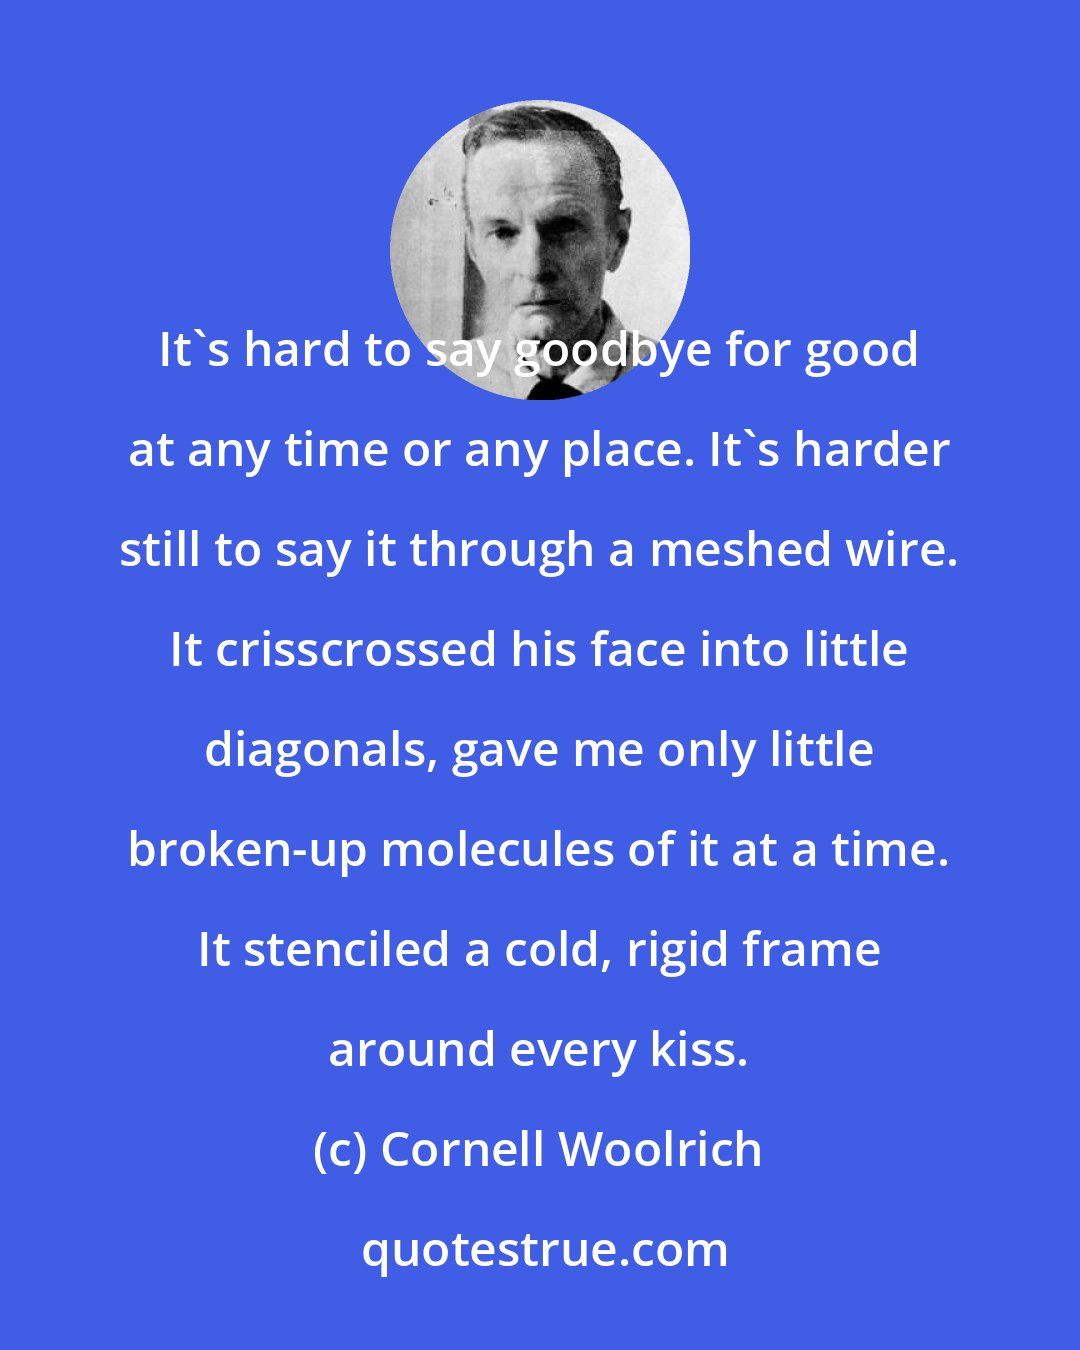 Cornell Woolrich: It's hard to say goodbye for good at any time or any place. It's harder still to say it through a meshed wire. It crisscrossed his face into little diagonals, gave me only little broken-up molecules of it at a time. It stenciled a cold, rigid frame around every kiss.